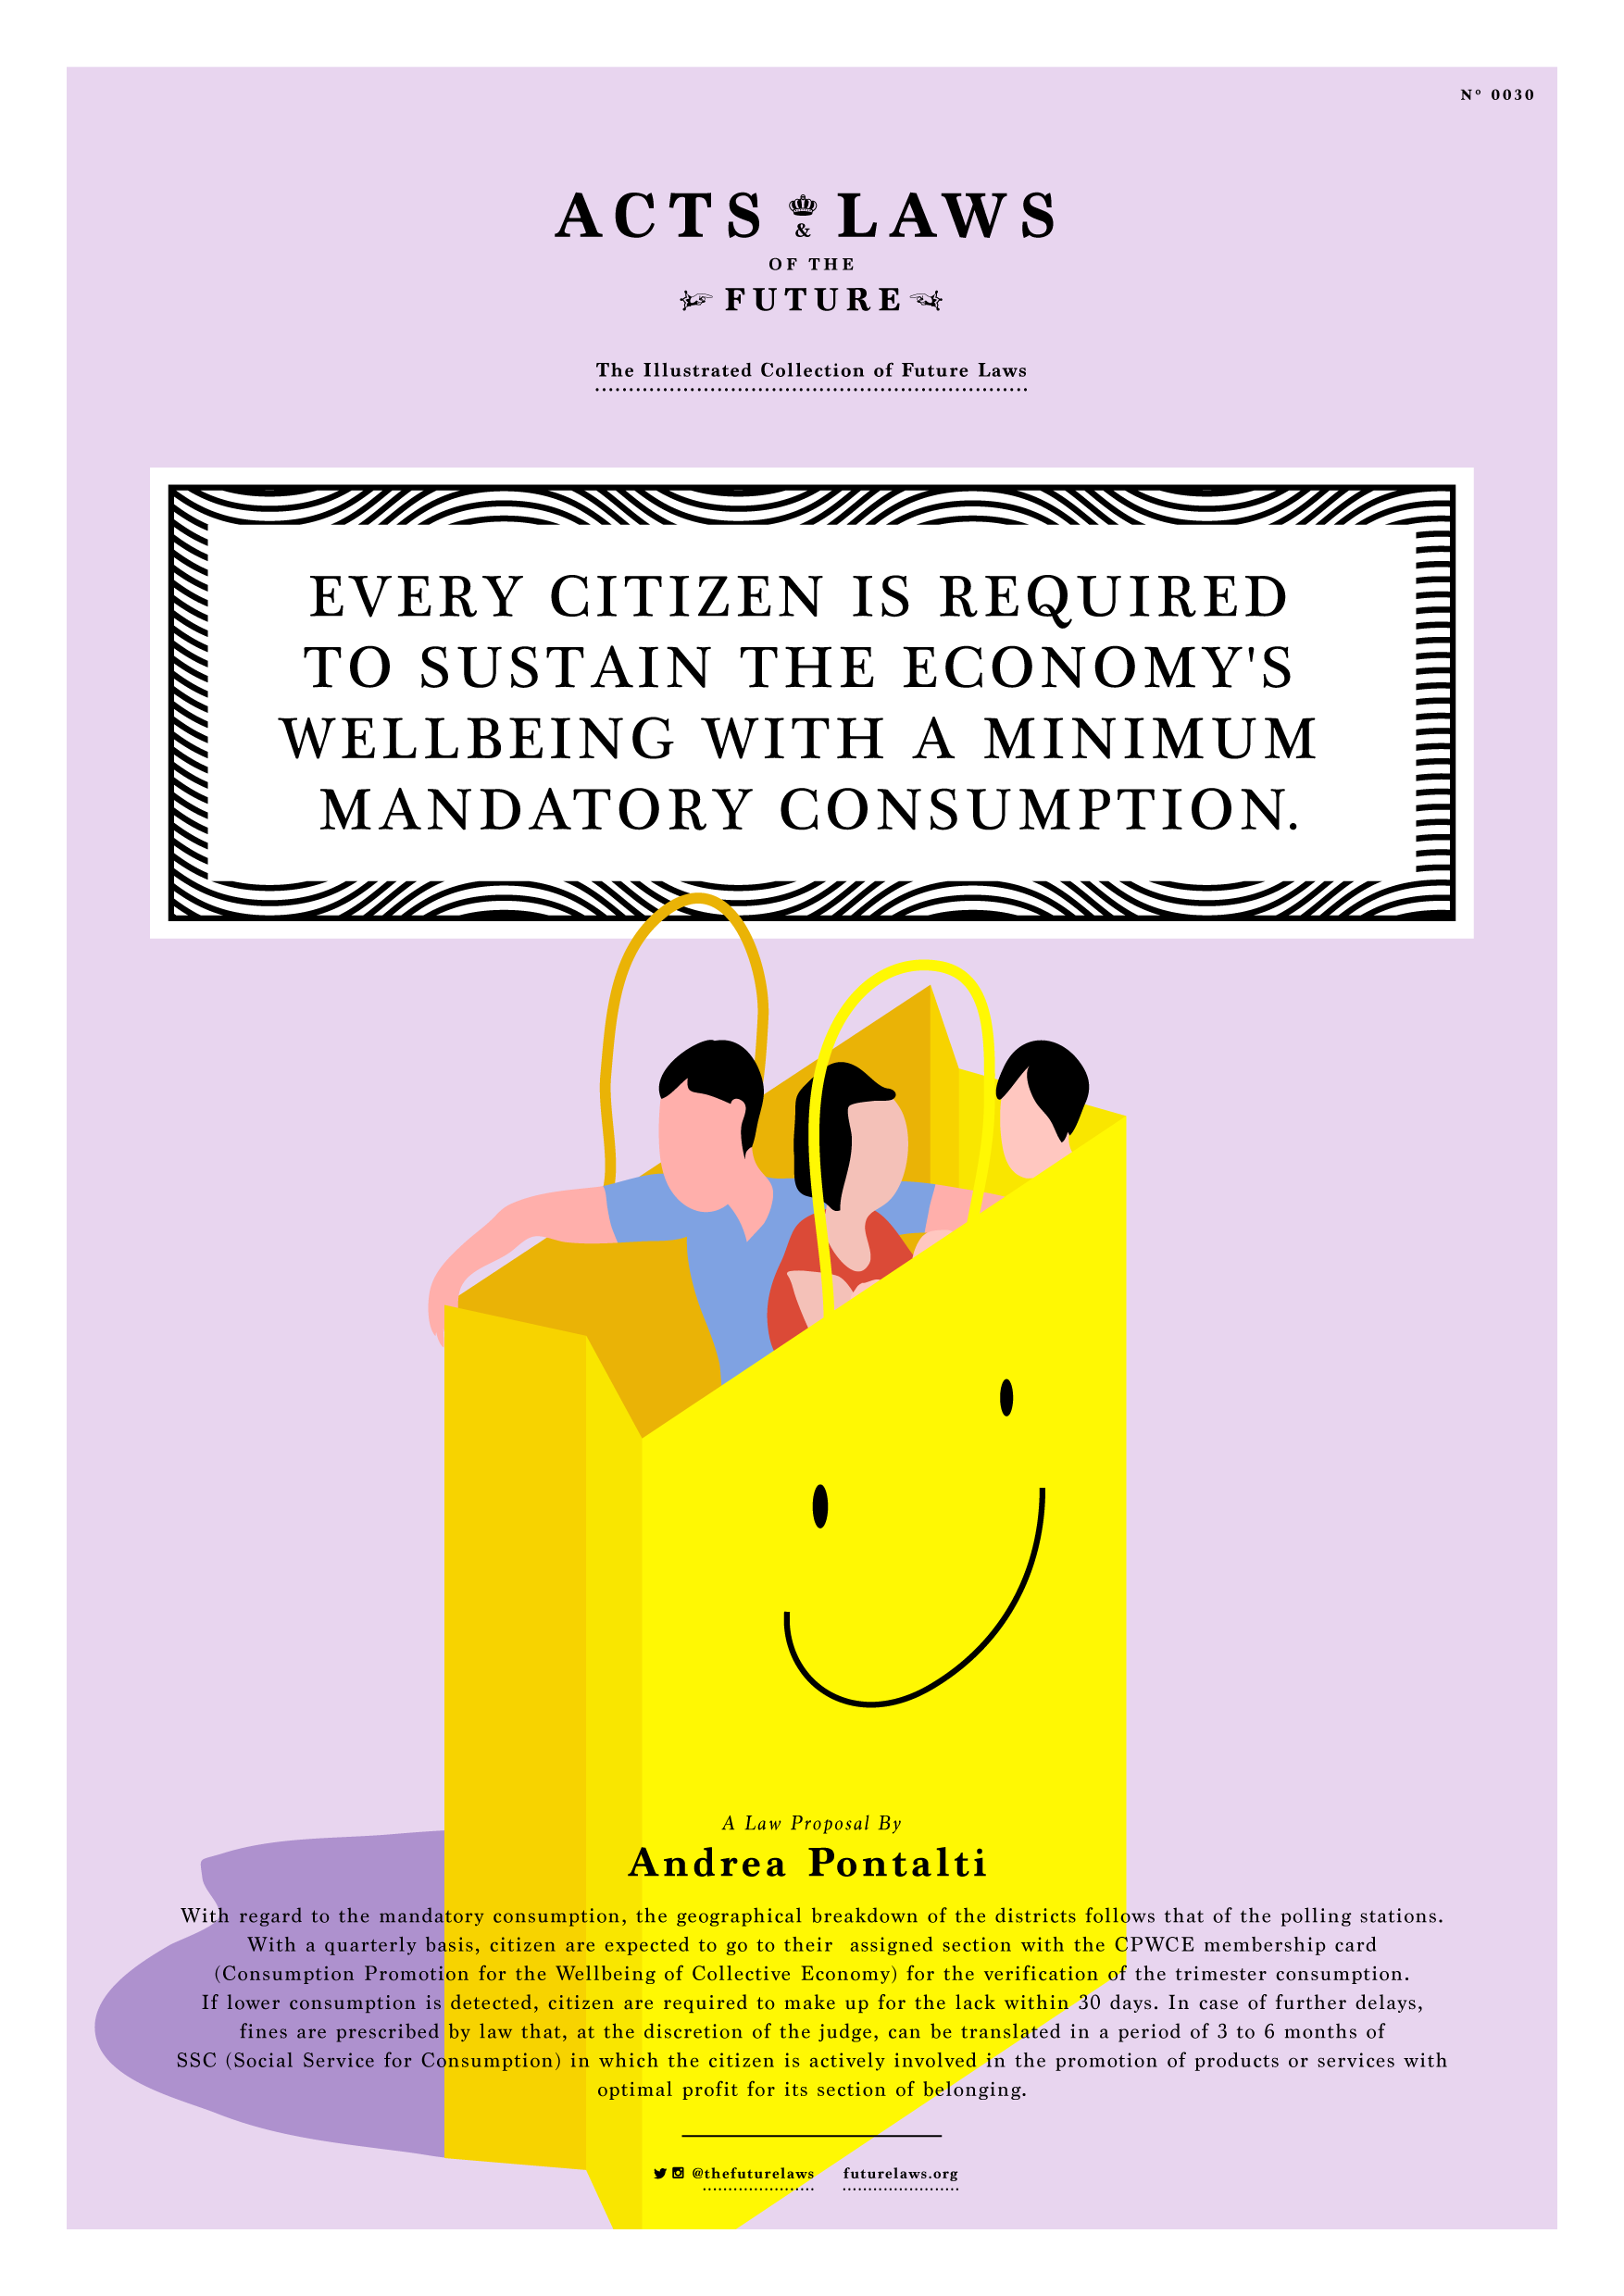 Every citizen is required to sustain the economy's wellbeing with a minimum mandatory consumption.	